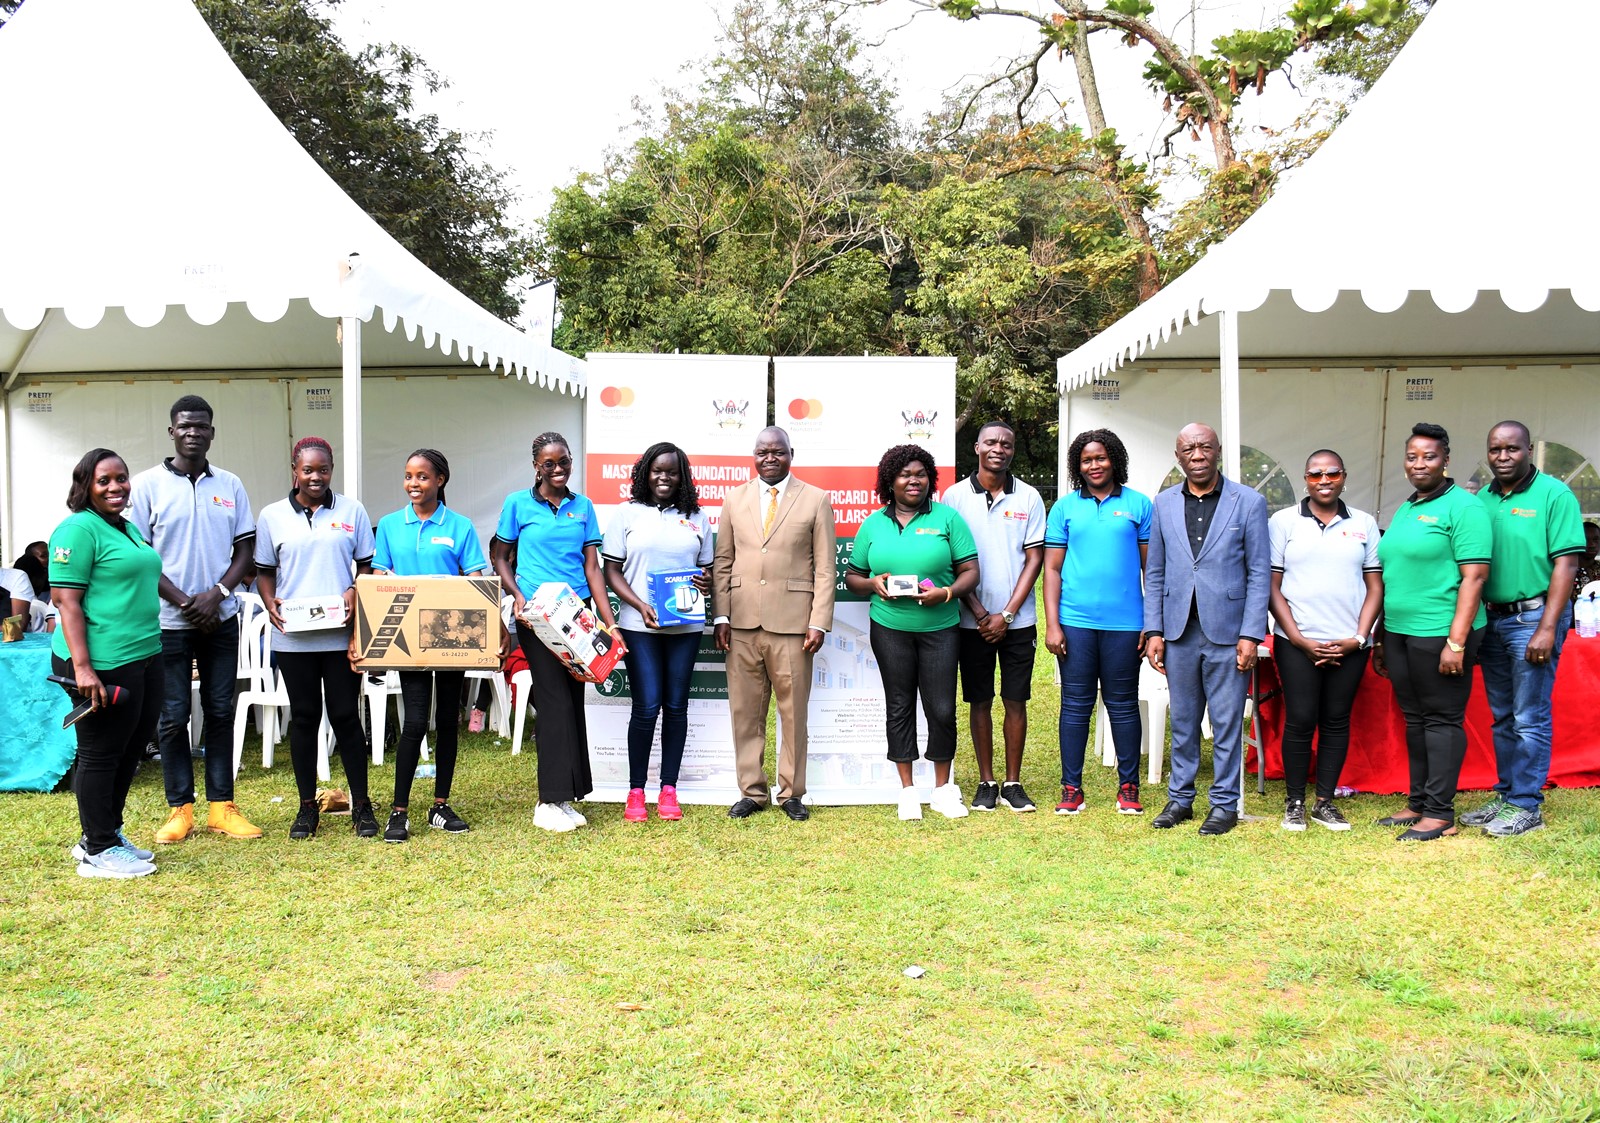 Hon. John Bosco Ngoya (7th Left), Prof. Henry Alinaitwe (4th Right), Prof. Justine Namaalwa (Left) with raffle draw winners and officials at the Open Day on 2nd September 2023. Mastercard Foundation Scholars Program Annual Community Open Day, Freedom Square, Makerere University, Kampala Uganda, East Africa.